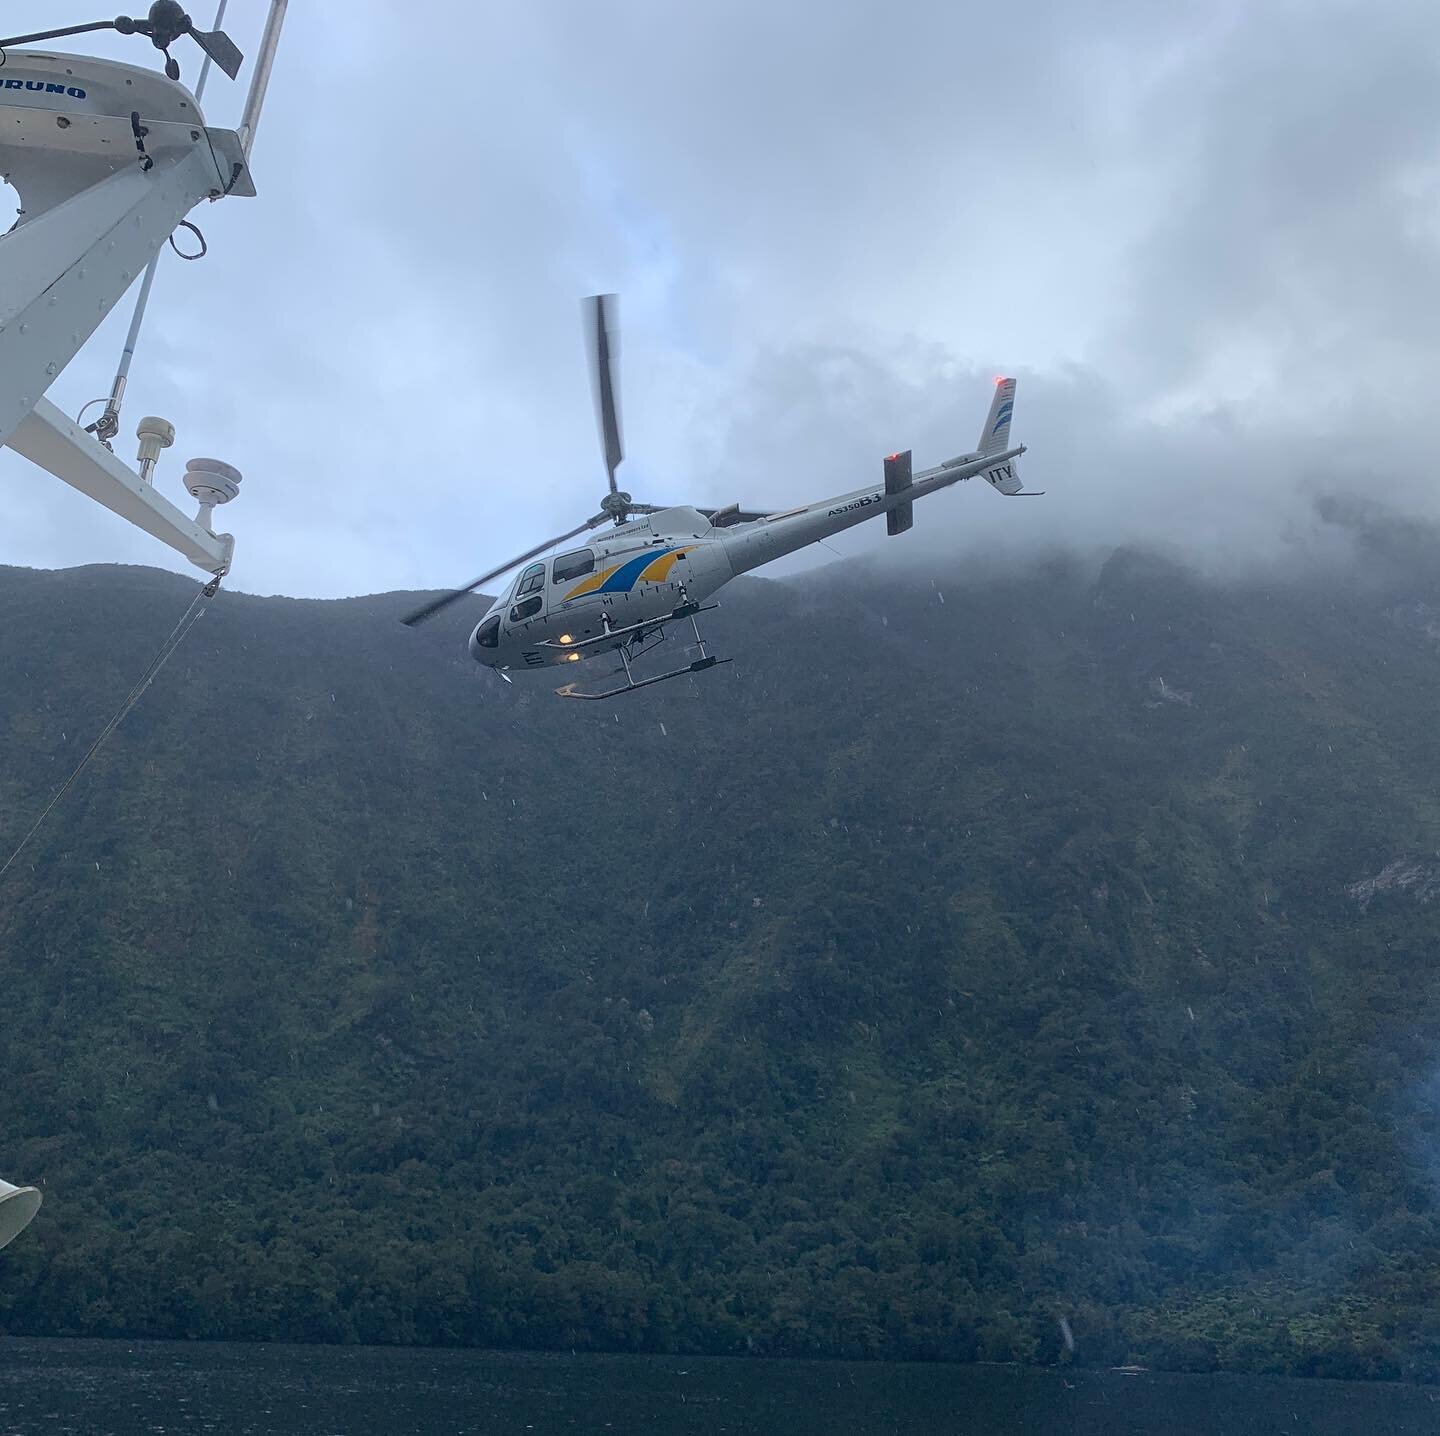 A great family group joined us for an overnight and opted to fly out #fiordland #overnight #travelnz #nztravel #teanauhelicopterservices #crayfish #bluecod